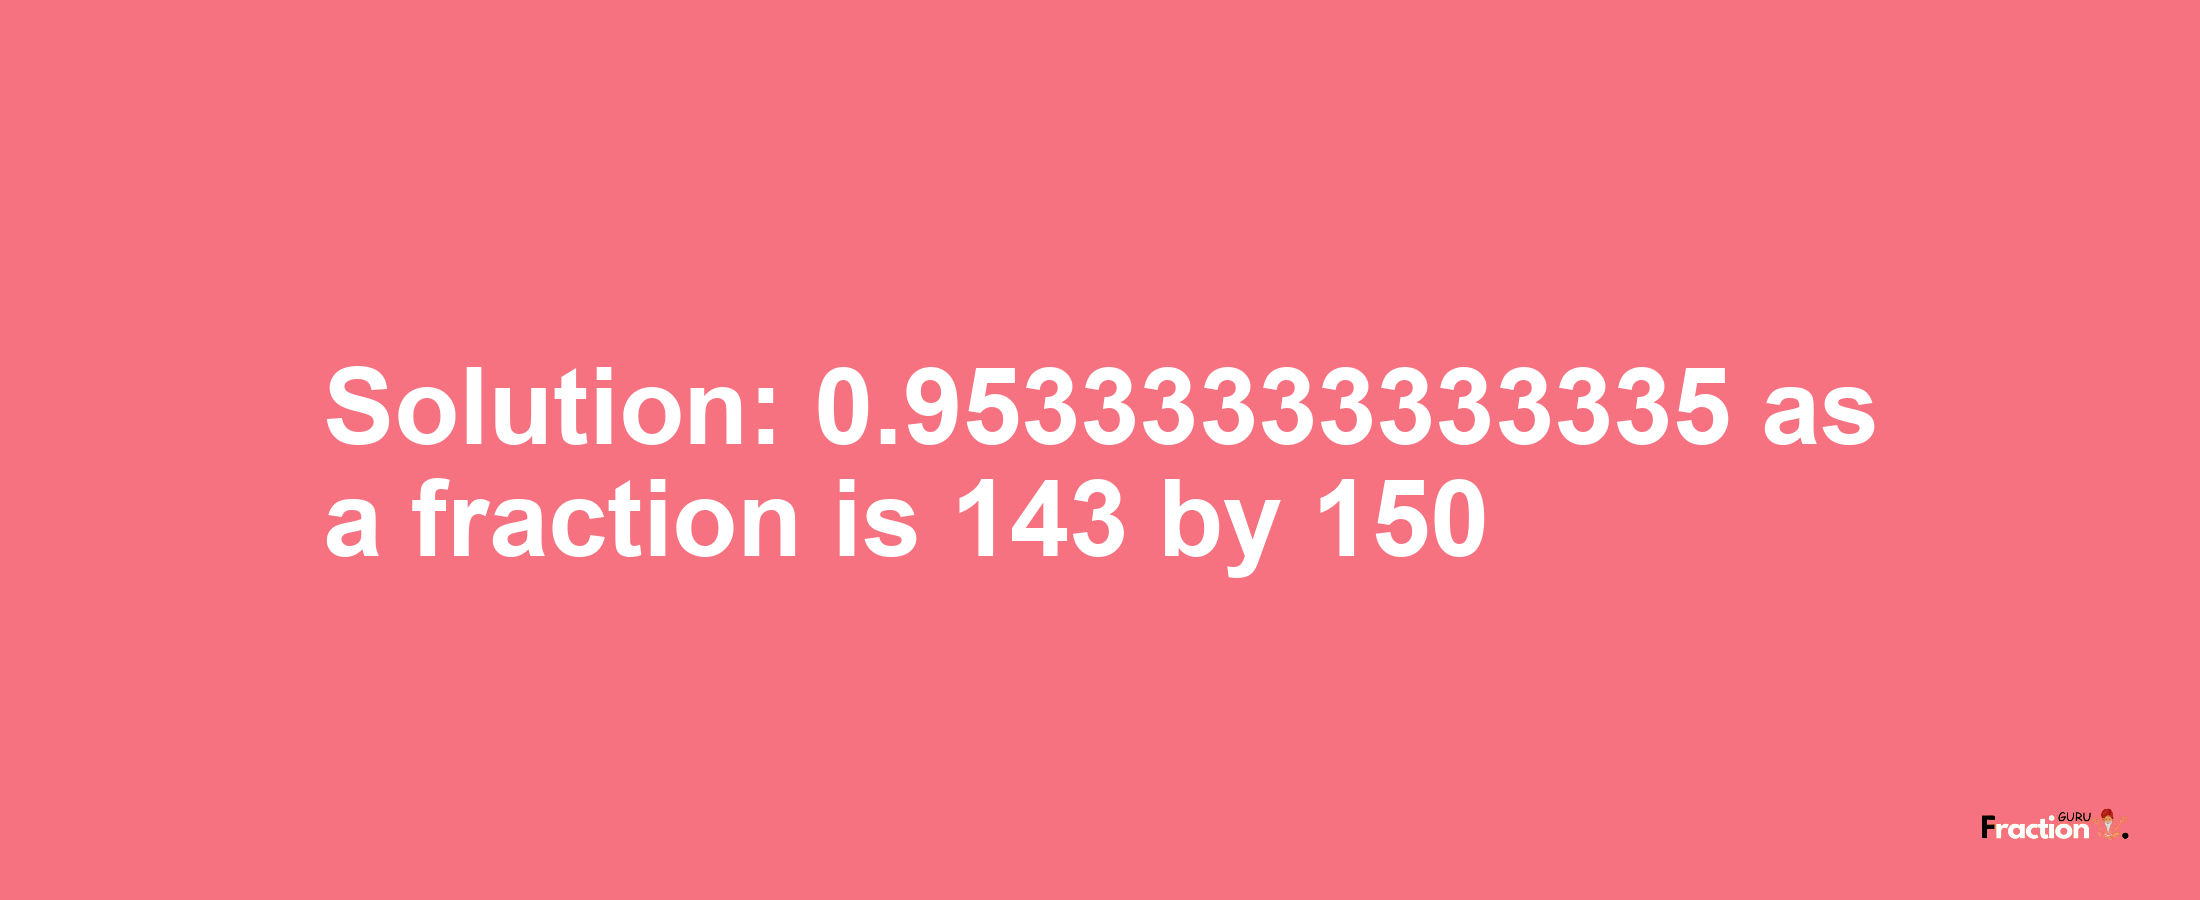 Solution:0.95333333333335 as a fraction is 143/150